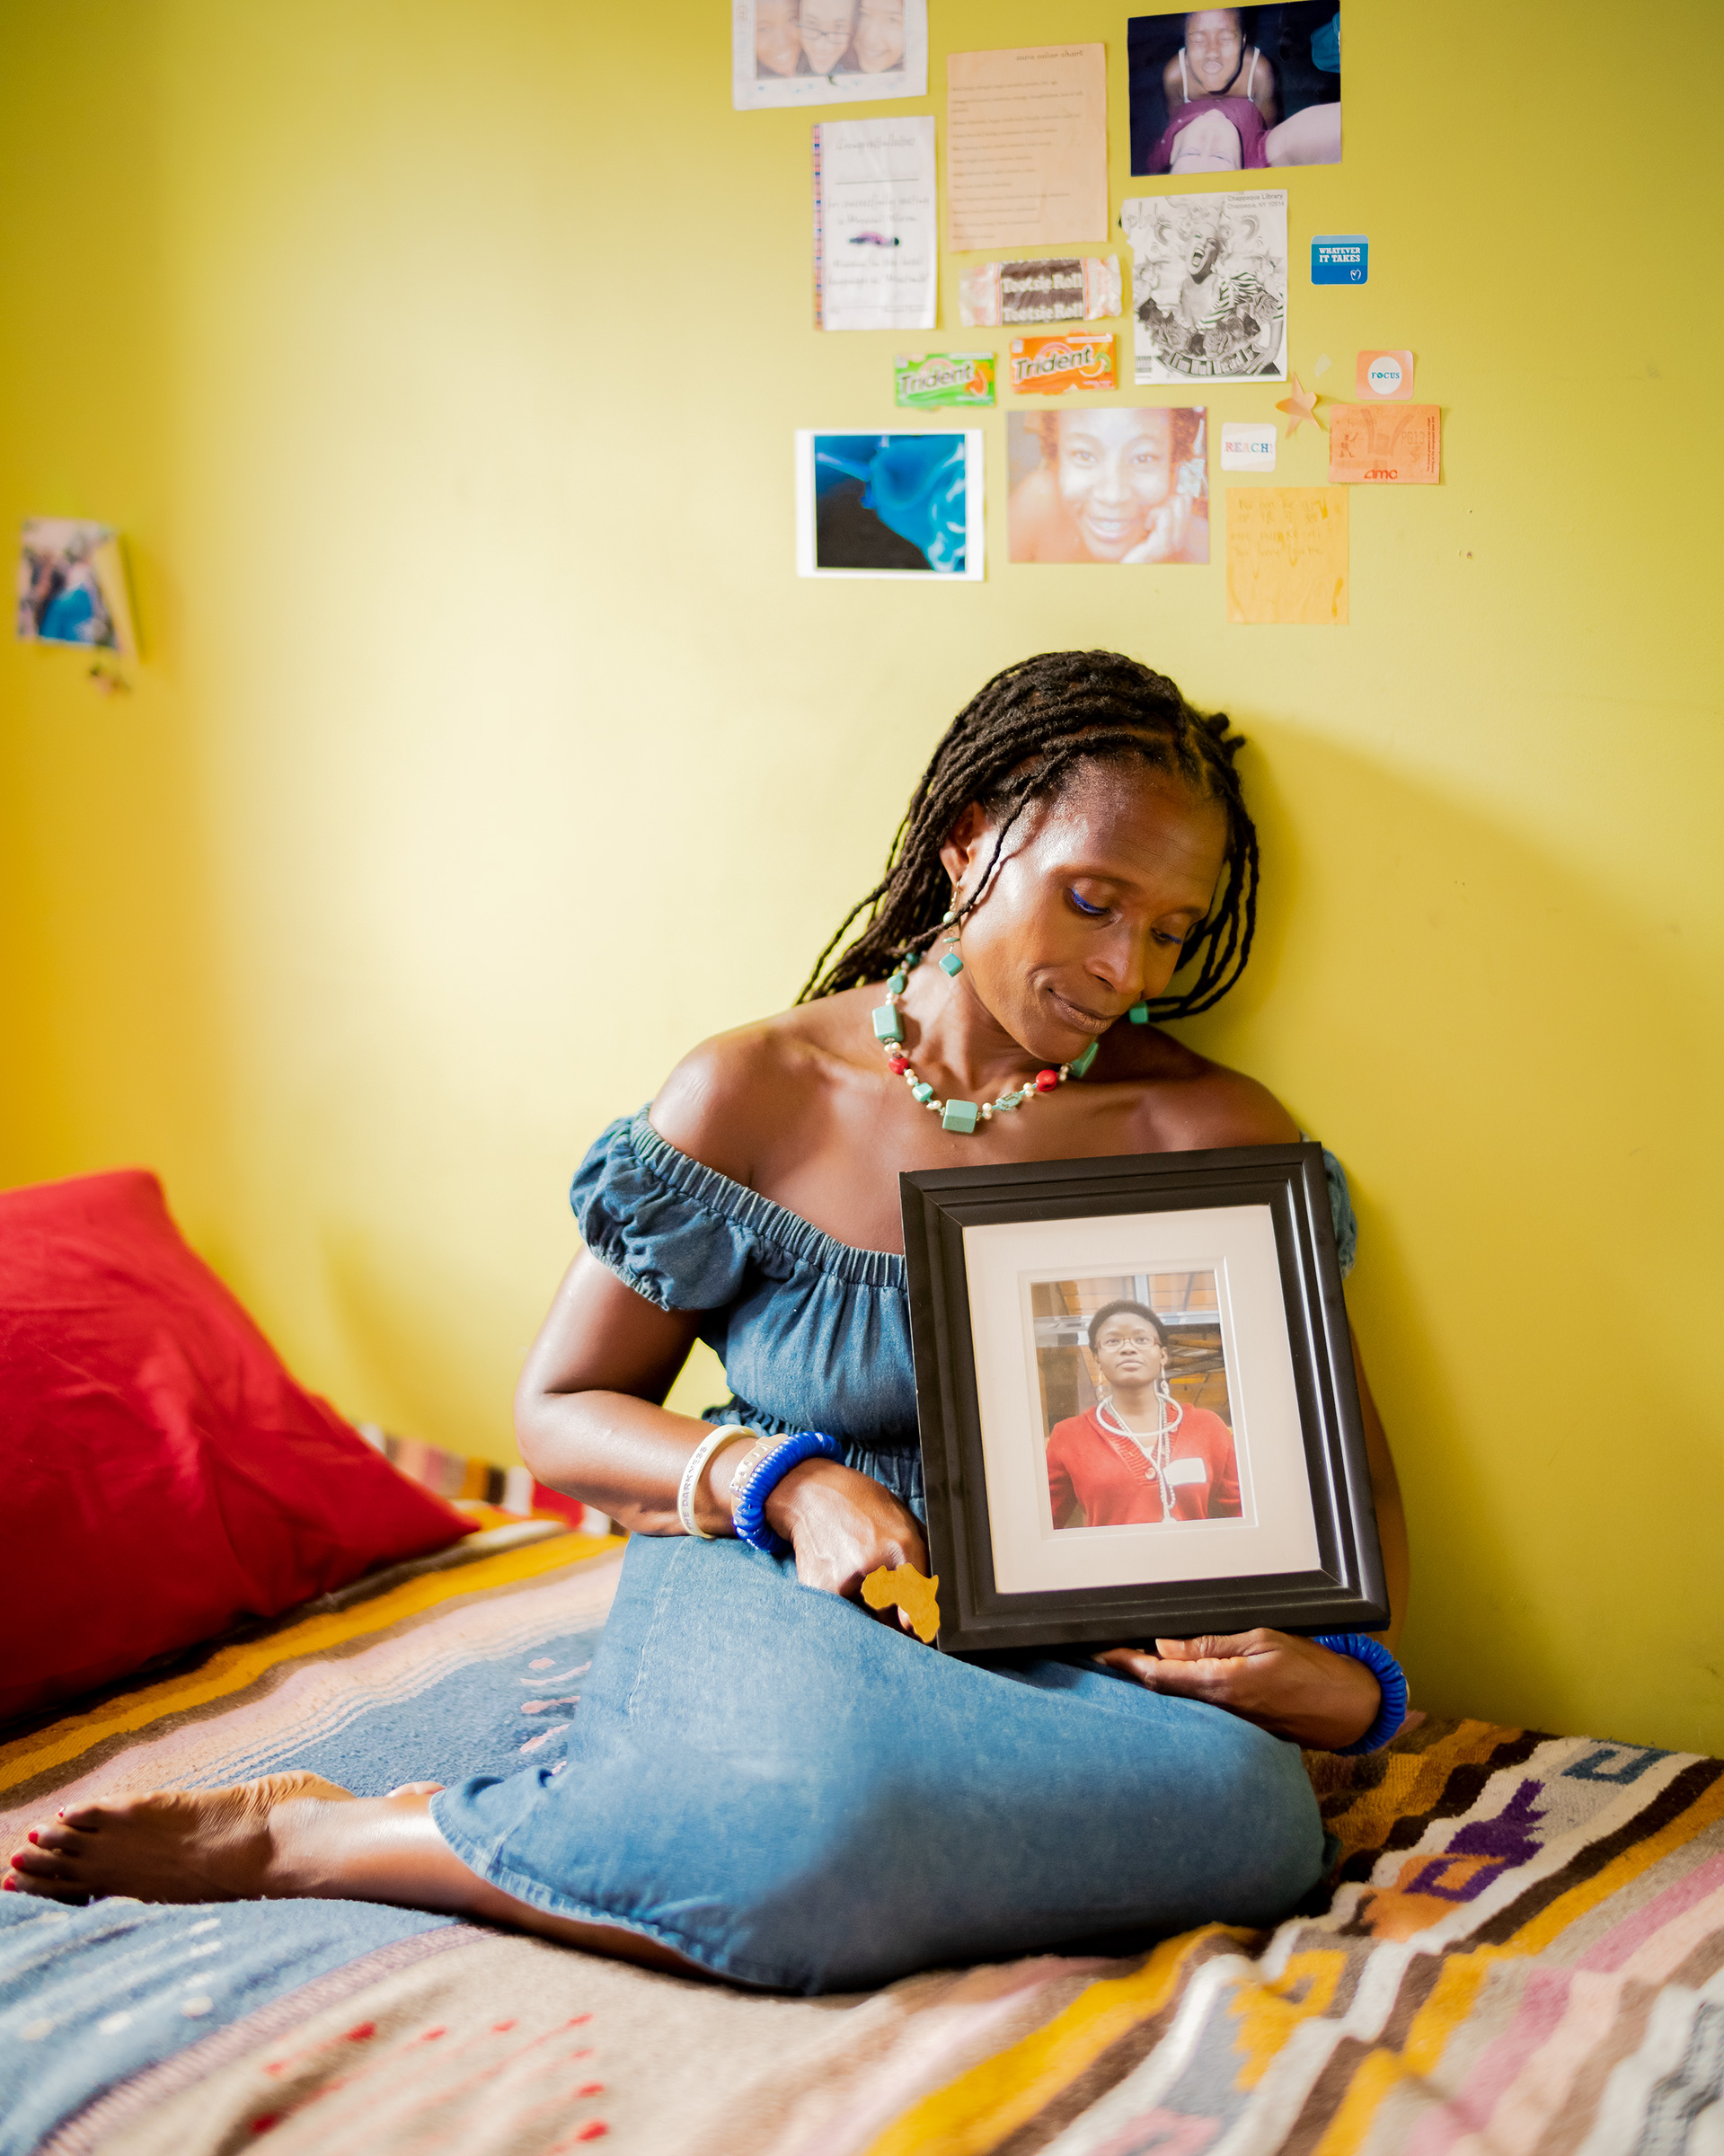 Dionne Monsanto holds a portrait of her daughter, Siwe, in the girl's bedroom in New York City, on Sept. 9, 2020. Siwe, 15, died by suicide in 2011.